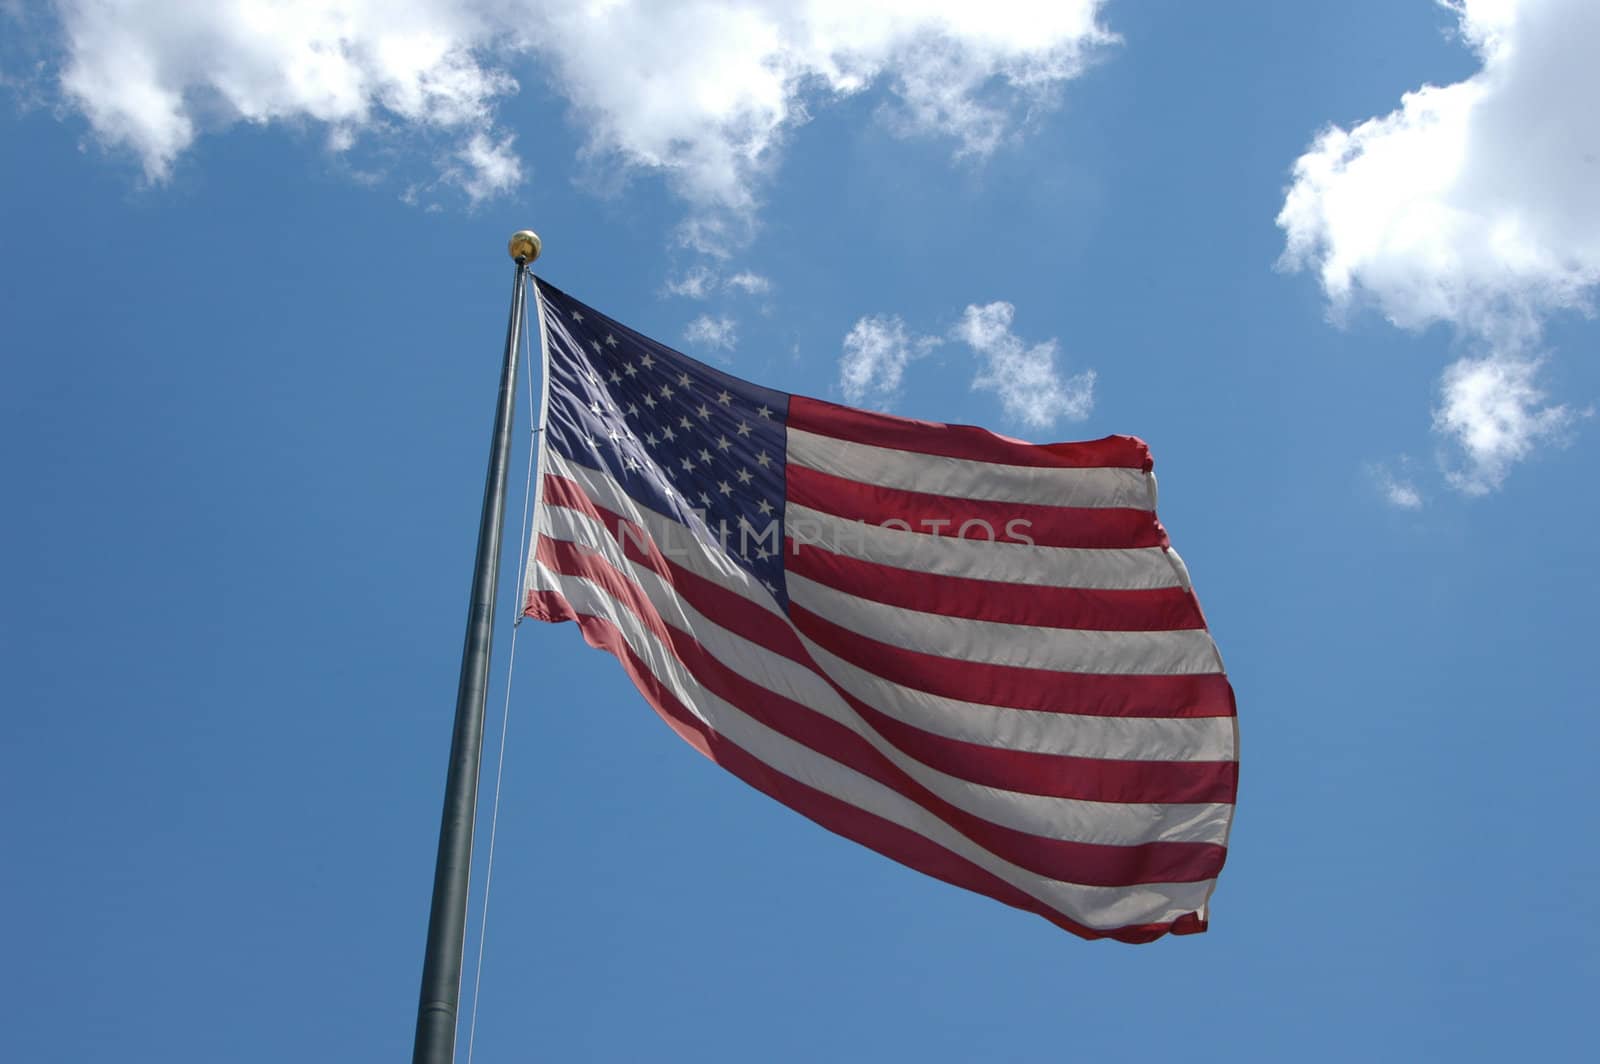 A large American flag flying in the breeze